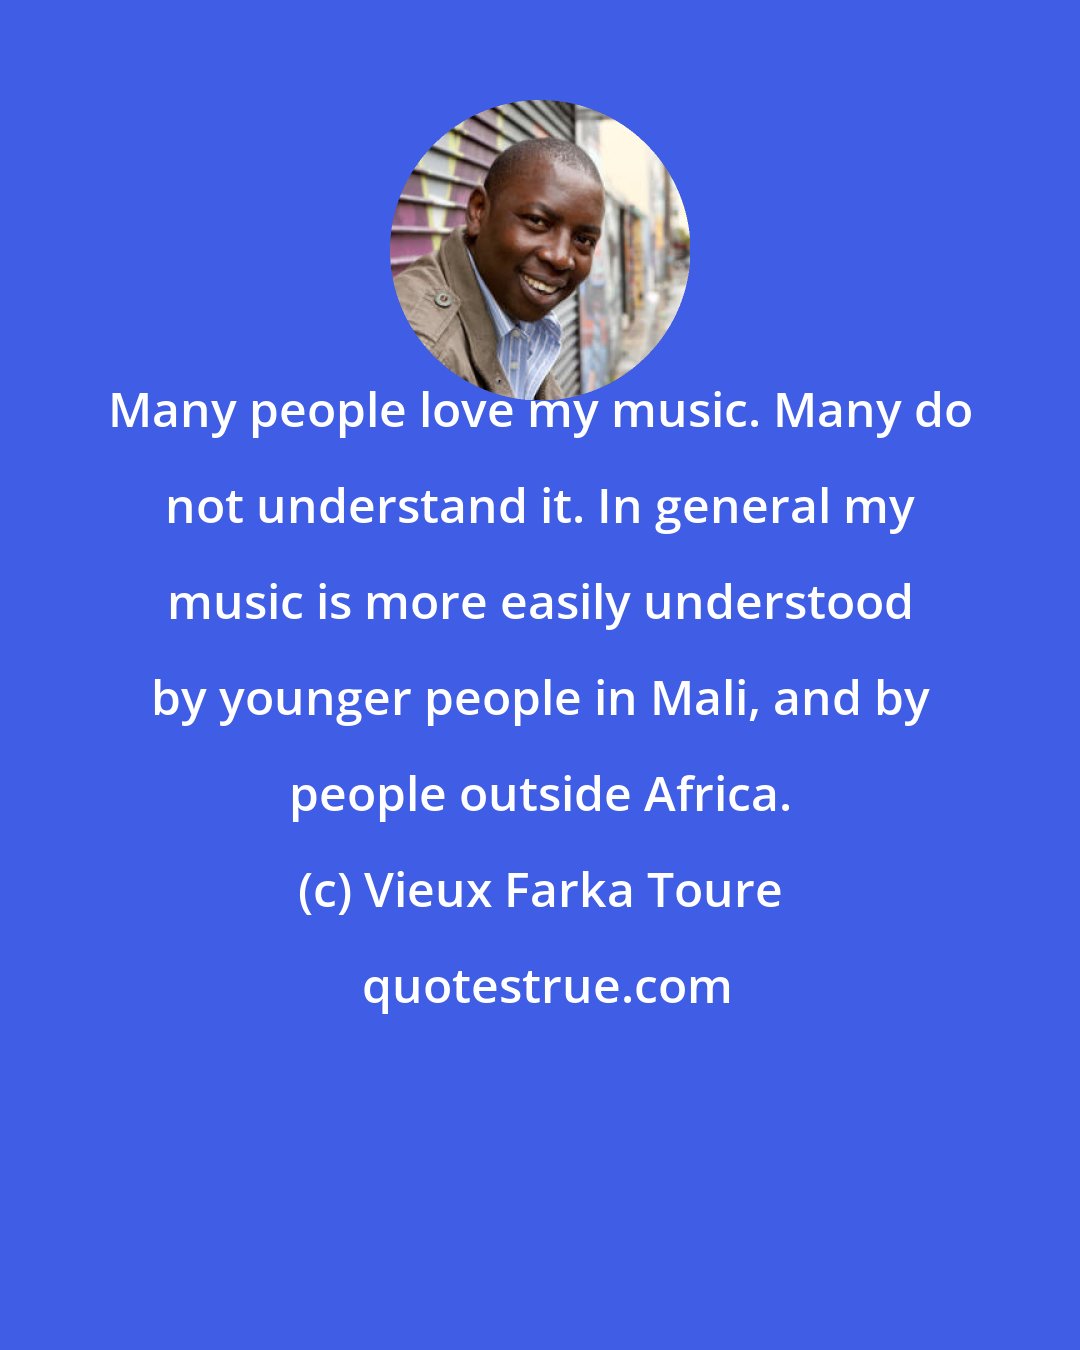 Vieux Farka Toure: Many people love my music. Many do not understand it. In general my music is more easily understood by younger people in Mali, and by people outside Africa.